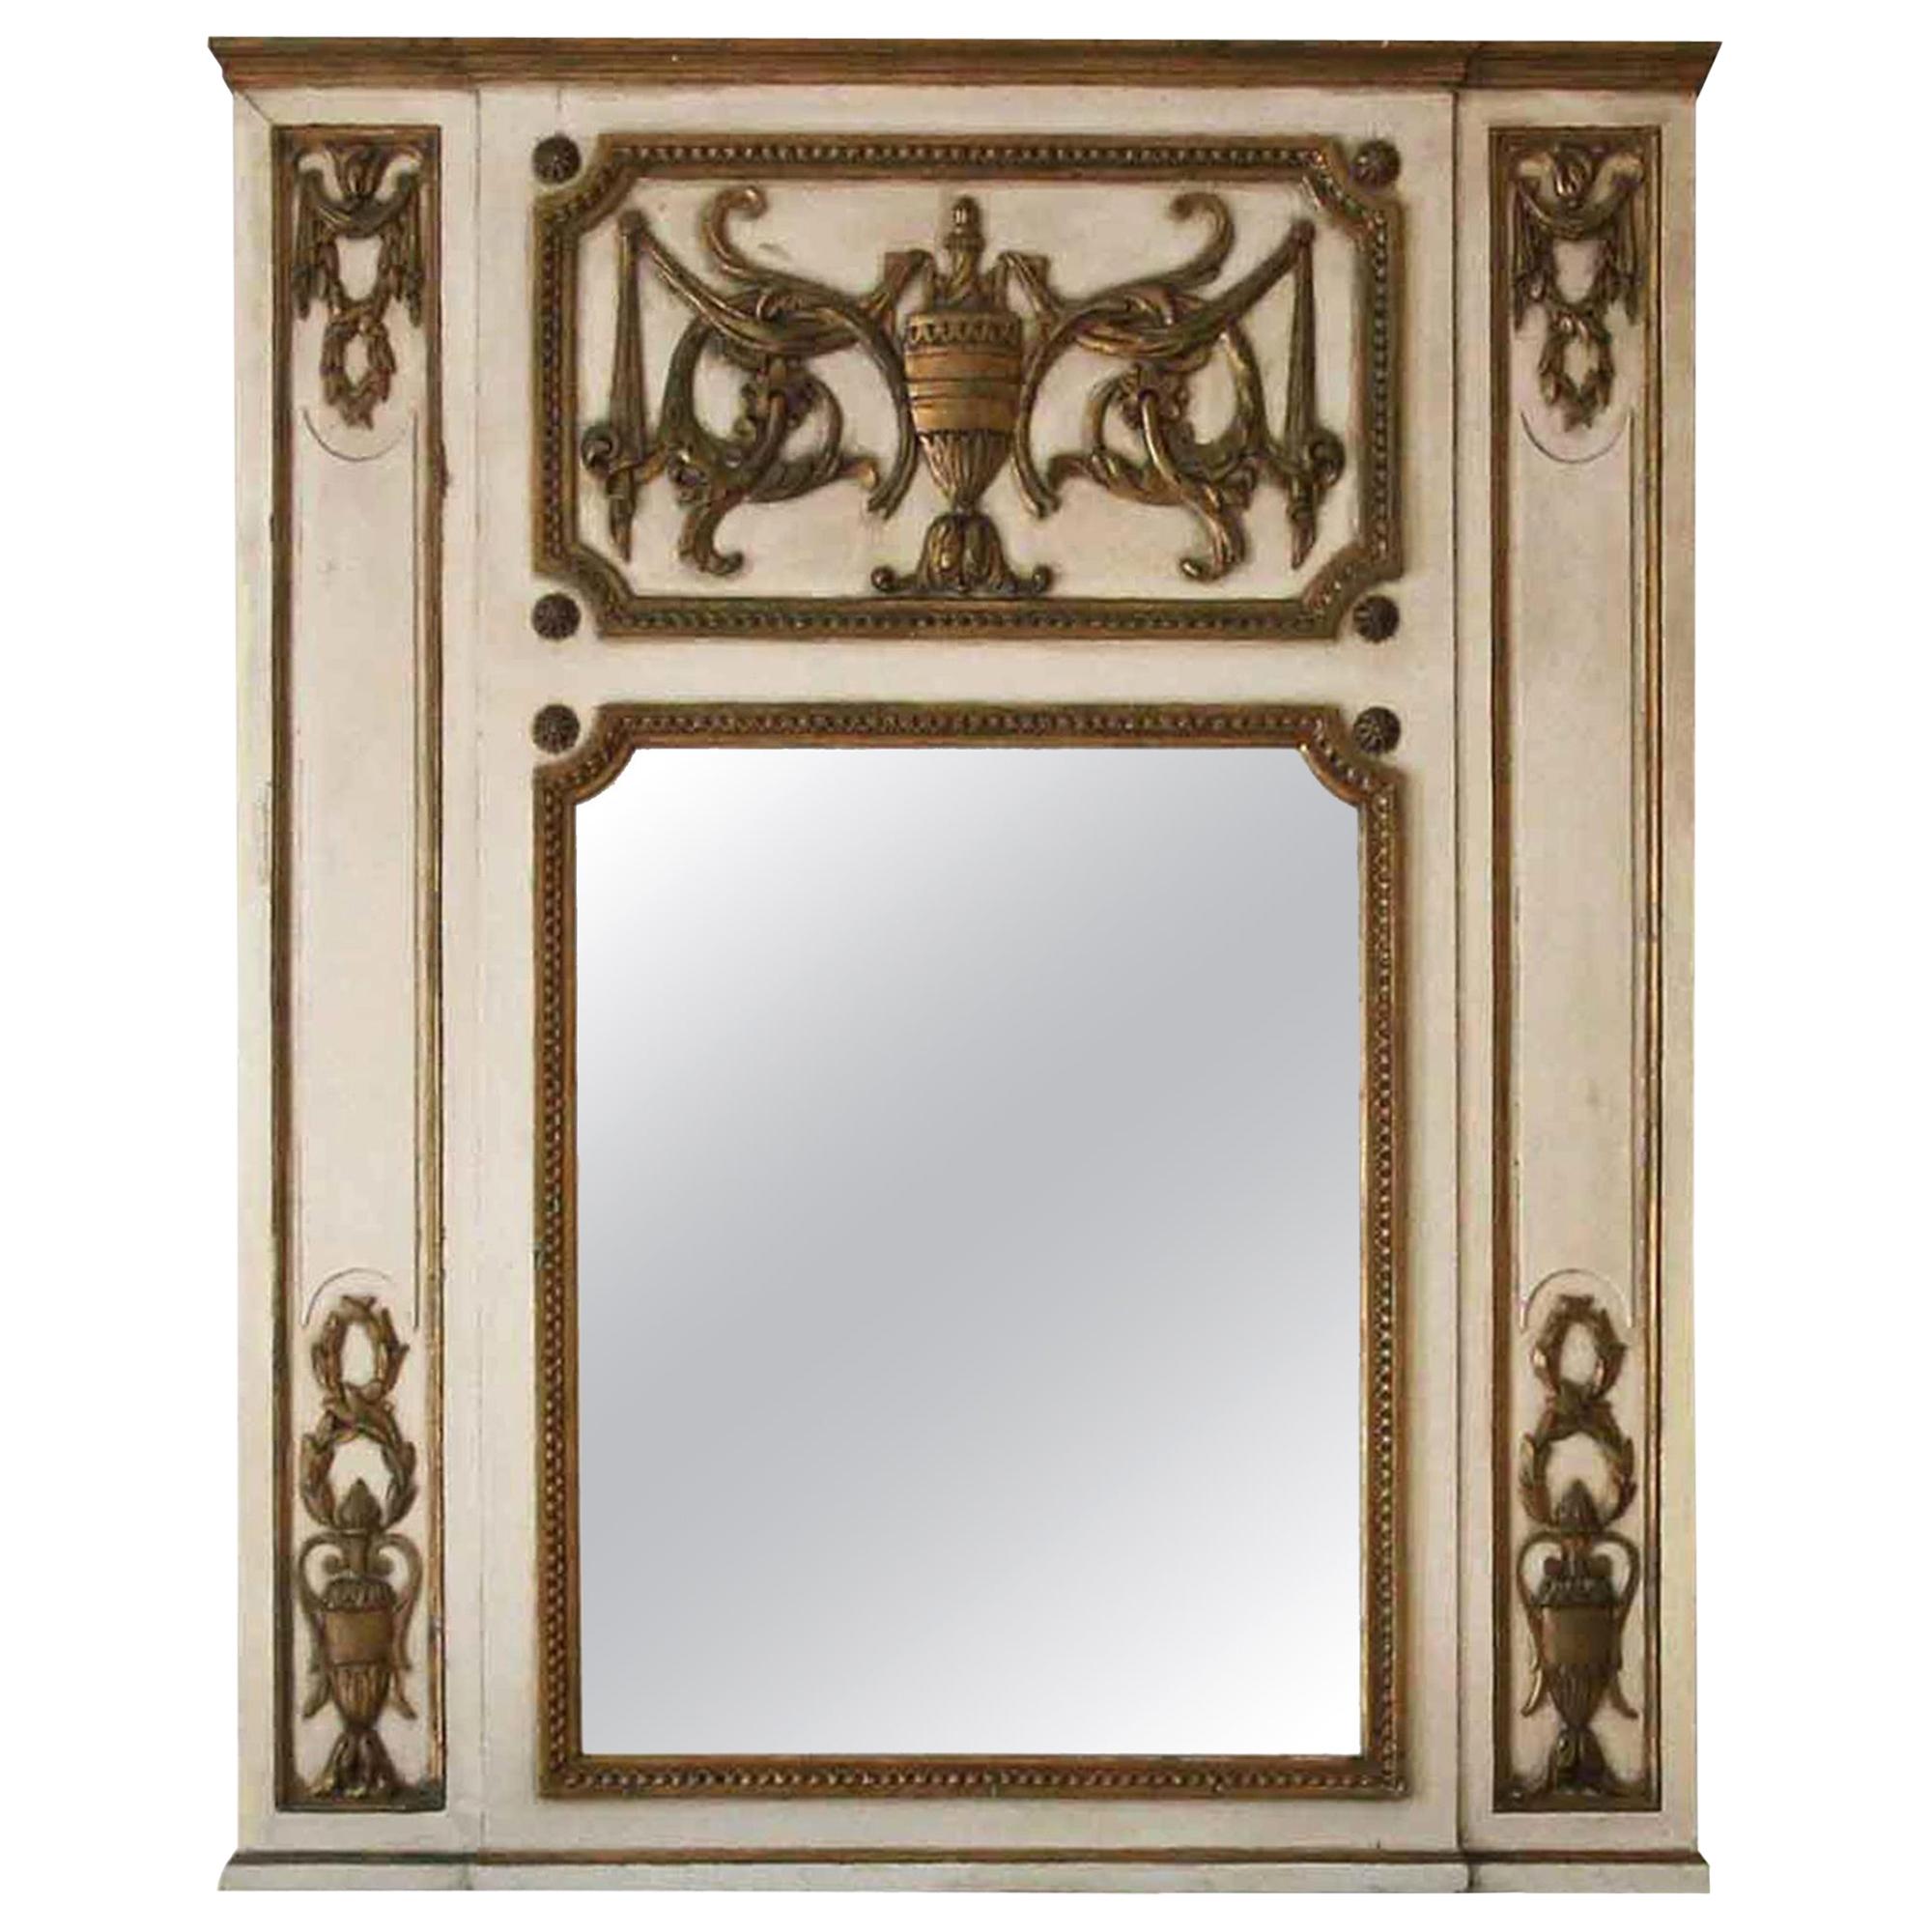 1931 NYC Waldorf Astoria Hotel Over Mantel Mirror from Ste. 665 Tan & Gold Wood 